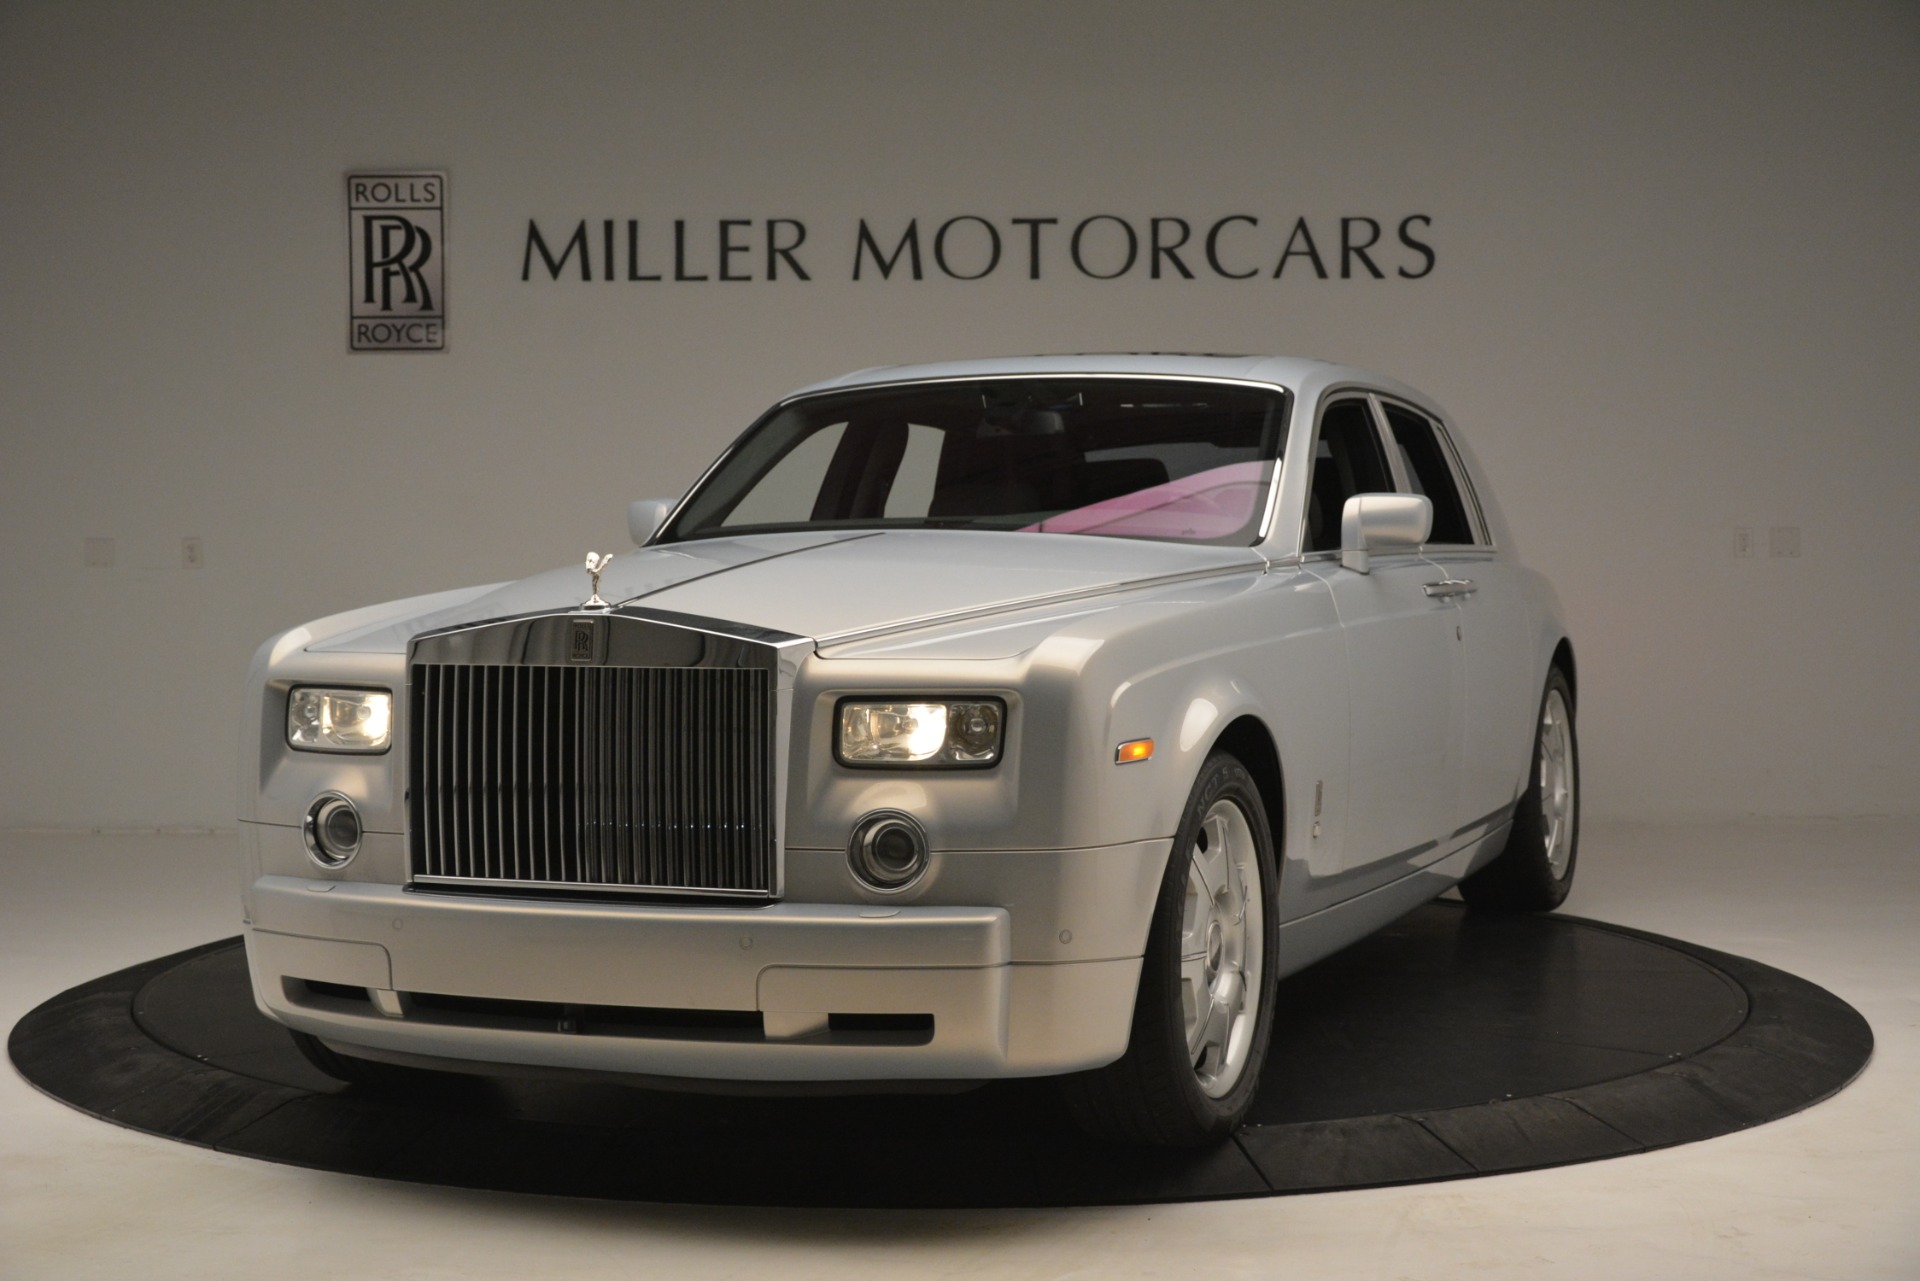 Used 2007 Rolls-Royce Phantom for sale Sold at Aston Martin of Greenwich in Greenwich CT 06830 1